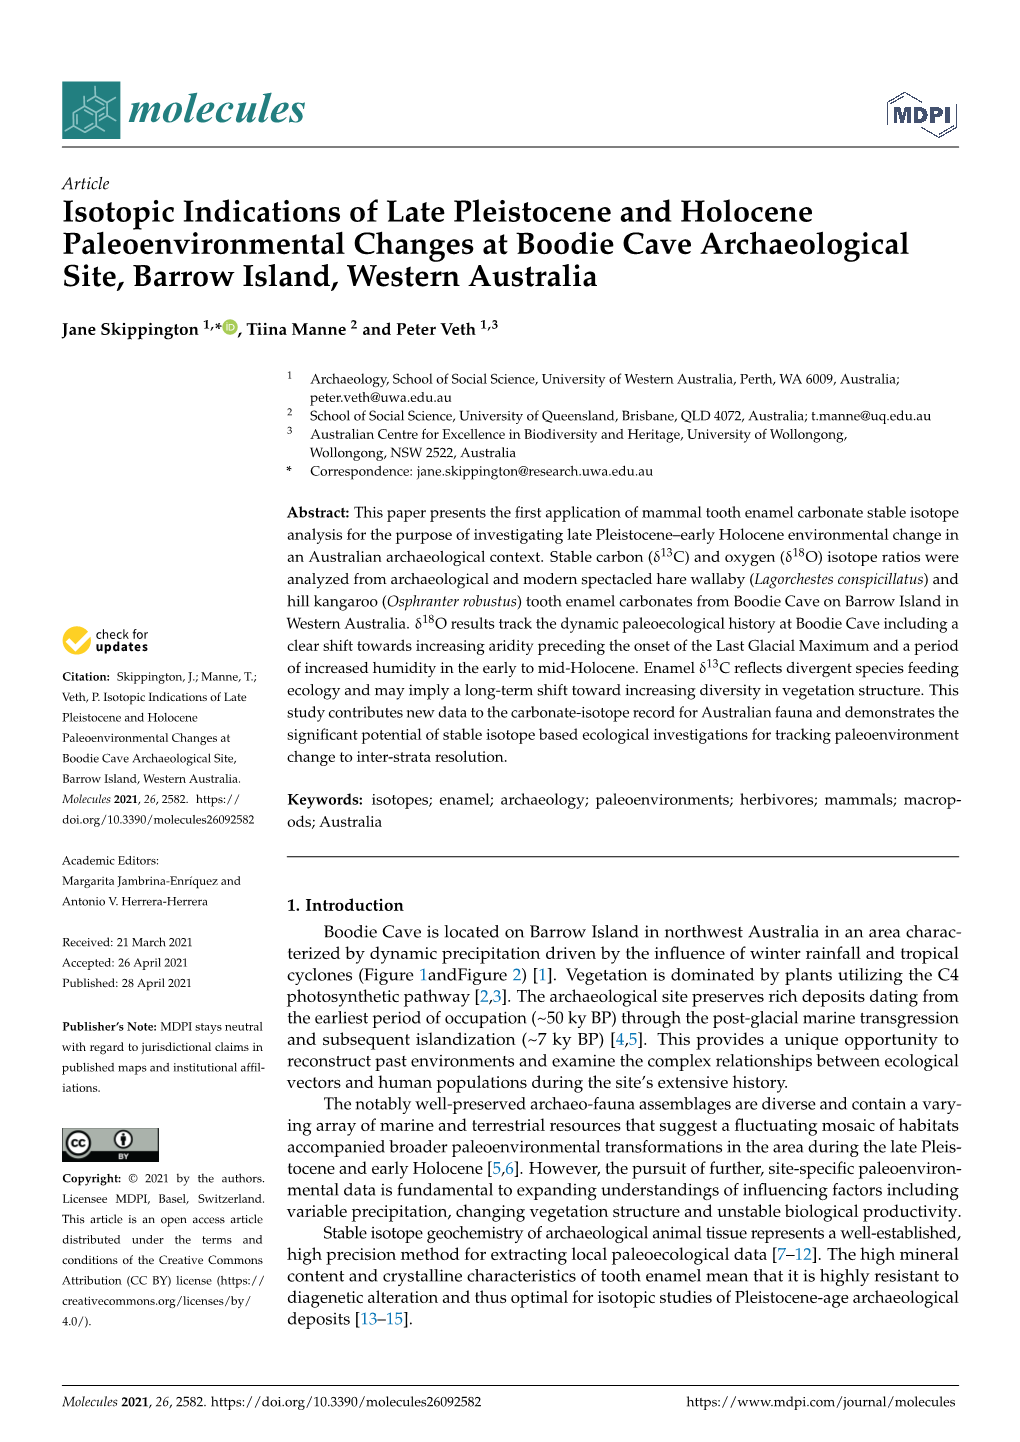 Isotopic Indications of Late Pleistocene and Holocene Paleoenvironmental Changes at Boodie Cave Archaeological Site, Barrow Island, Western Australia